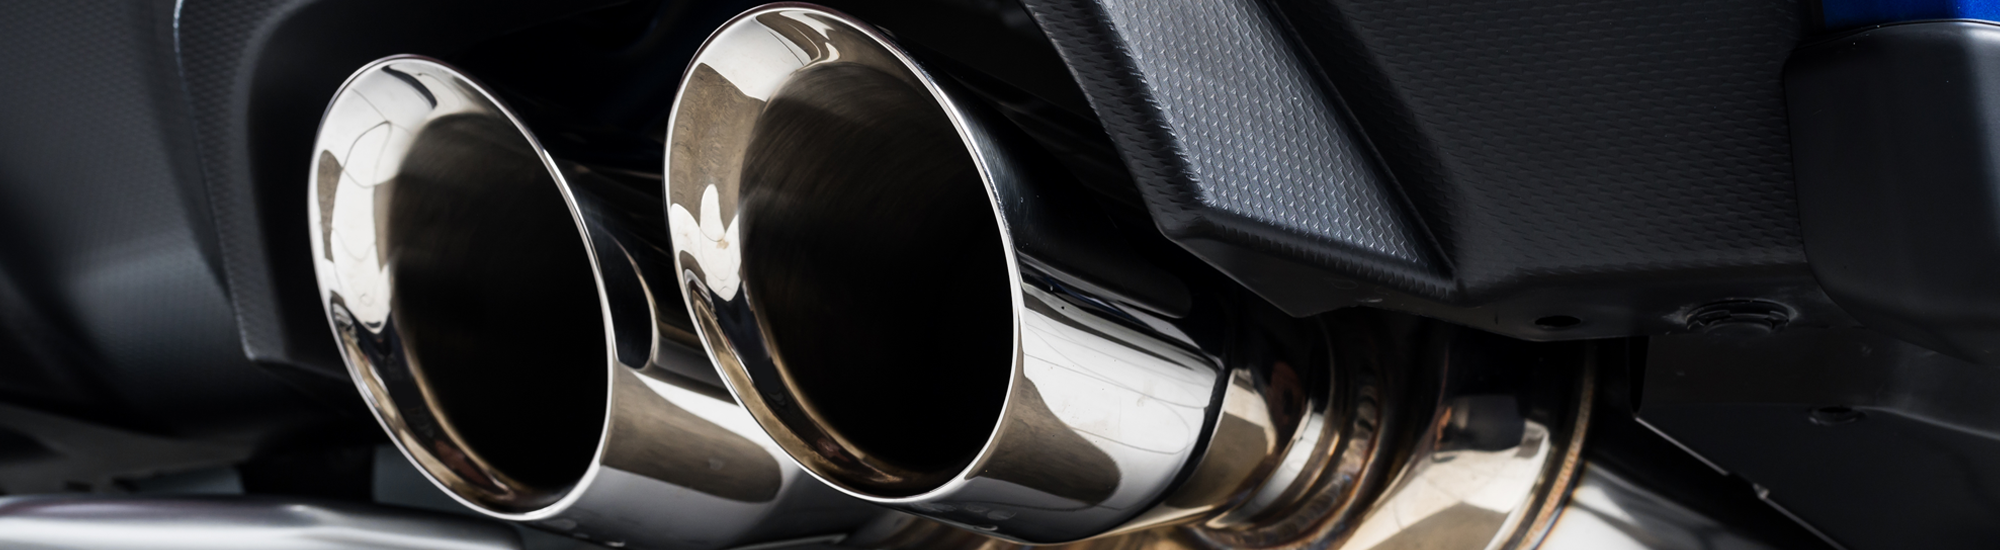 Up Close of Exhaust